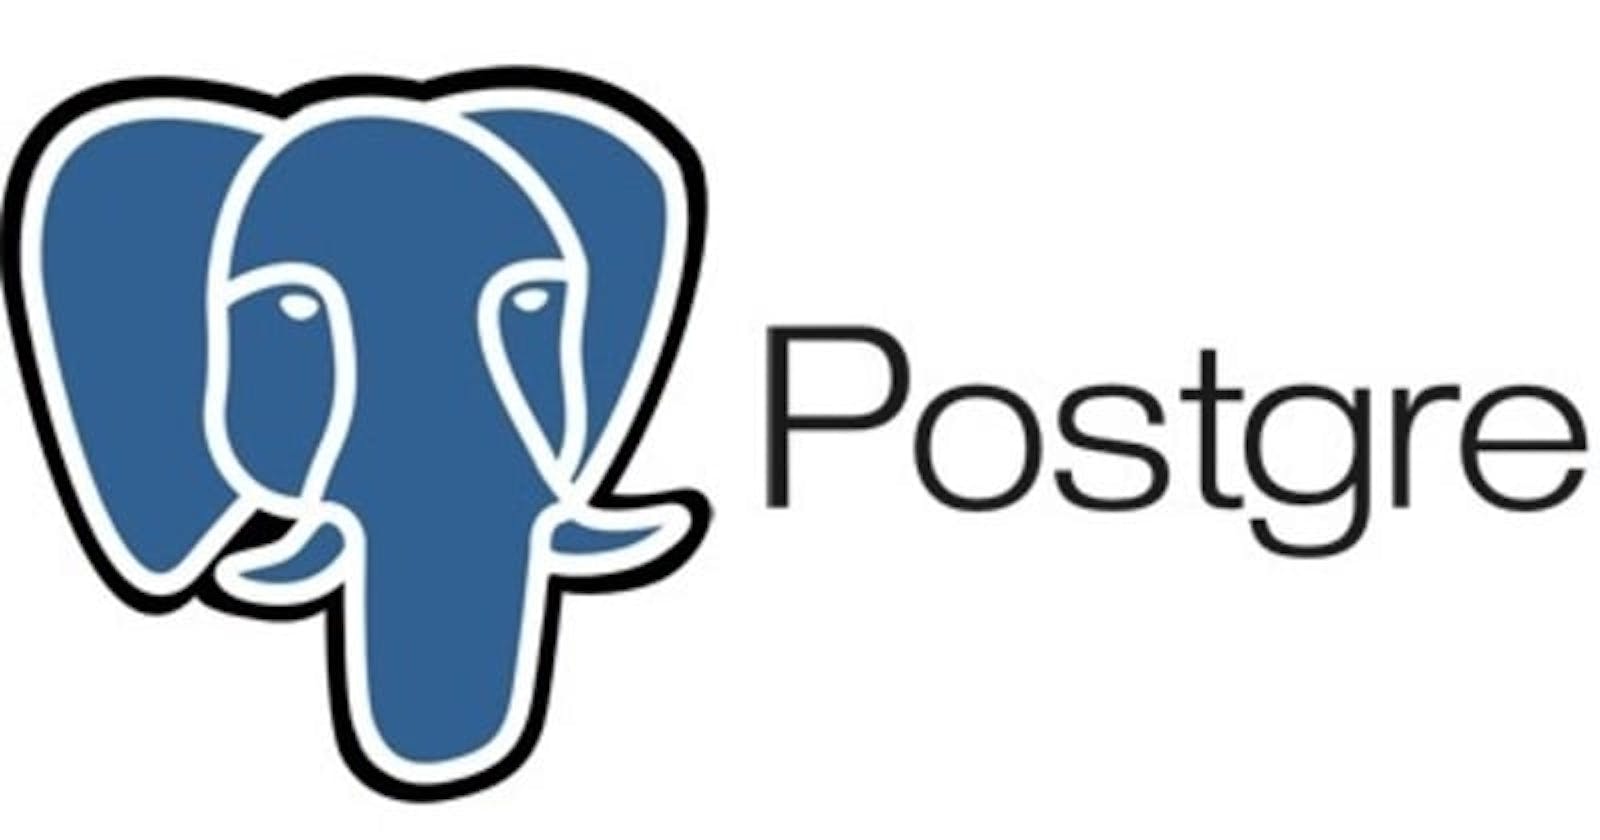 How To Drop A Postgres Role/User With privileges